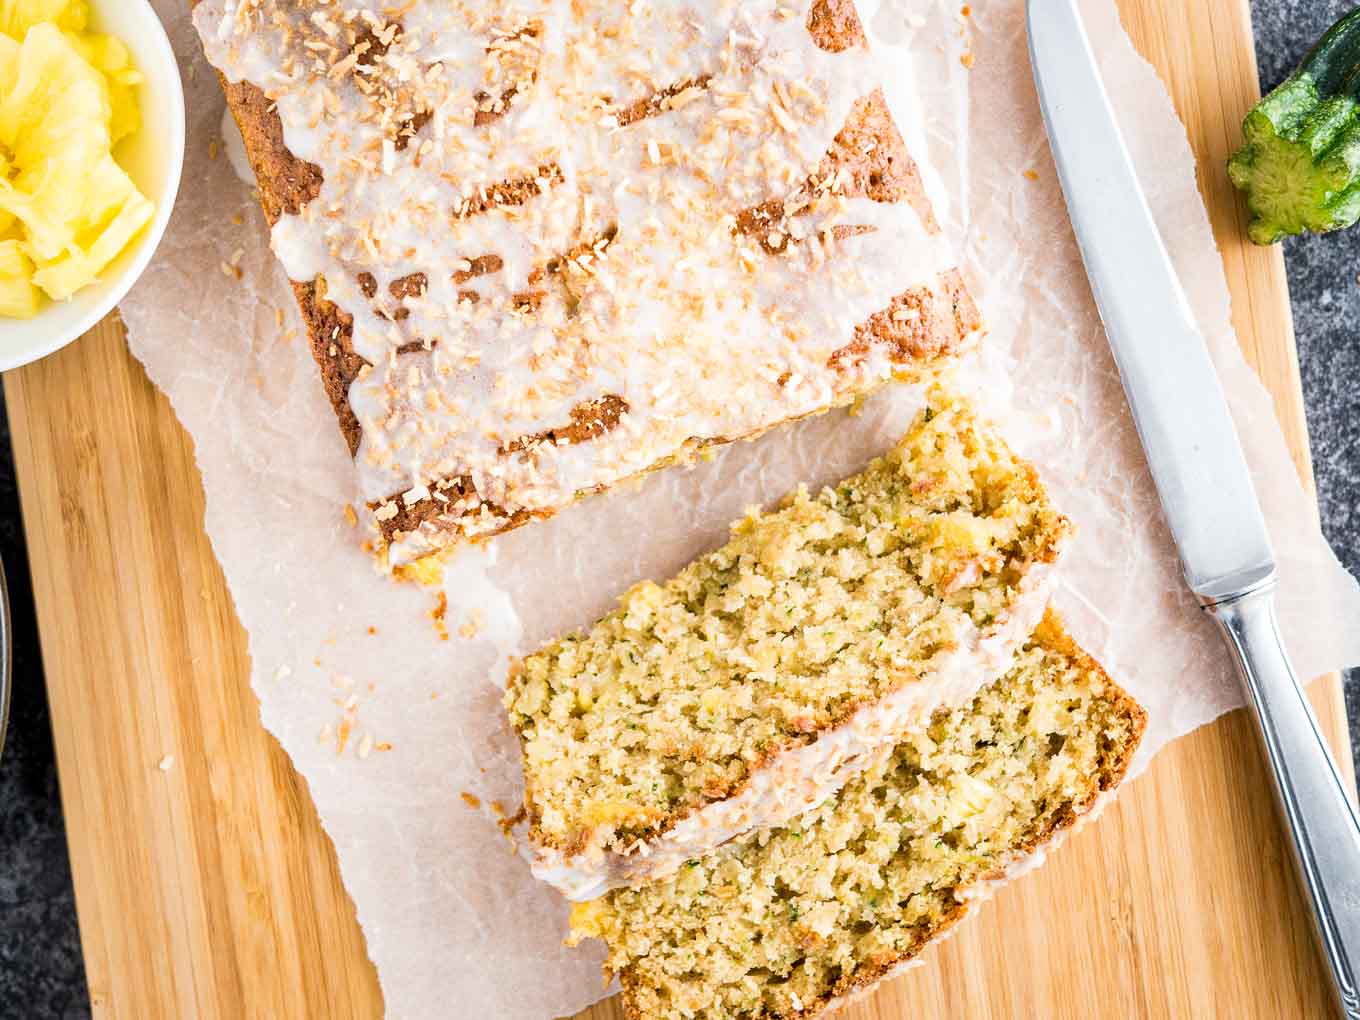 Top-down shot of a loaf of pineapple zucchini bread on a wooden cutting board lined with parchment paper. Two slices have been cut off and are lying in front of it. There\'s a knife, a small white bowl of pineapple and a zucchini.